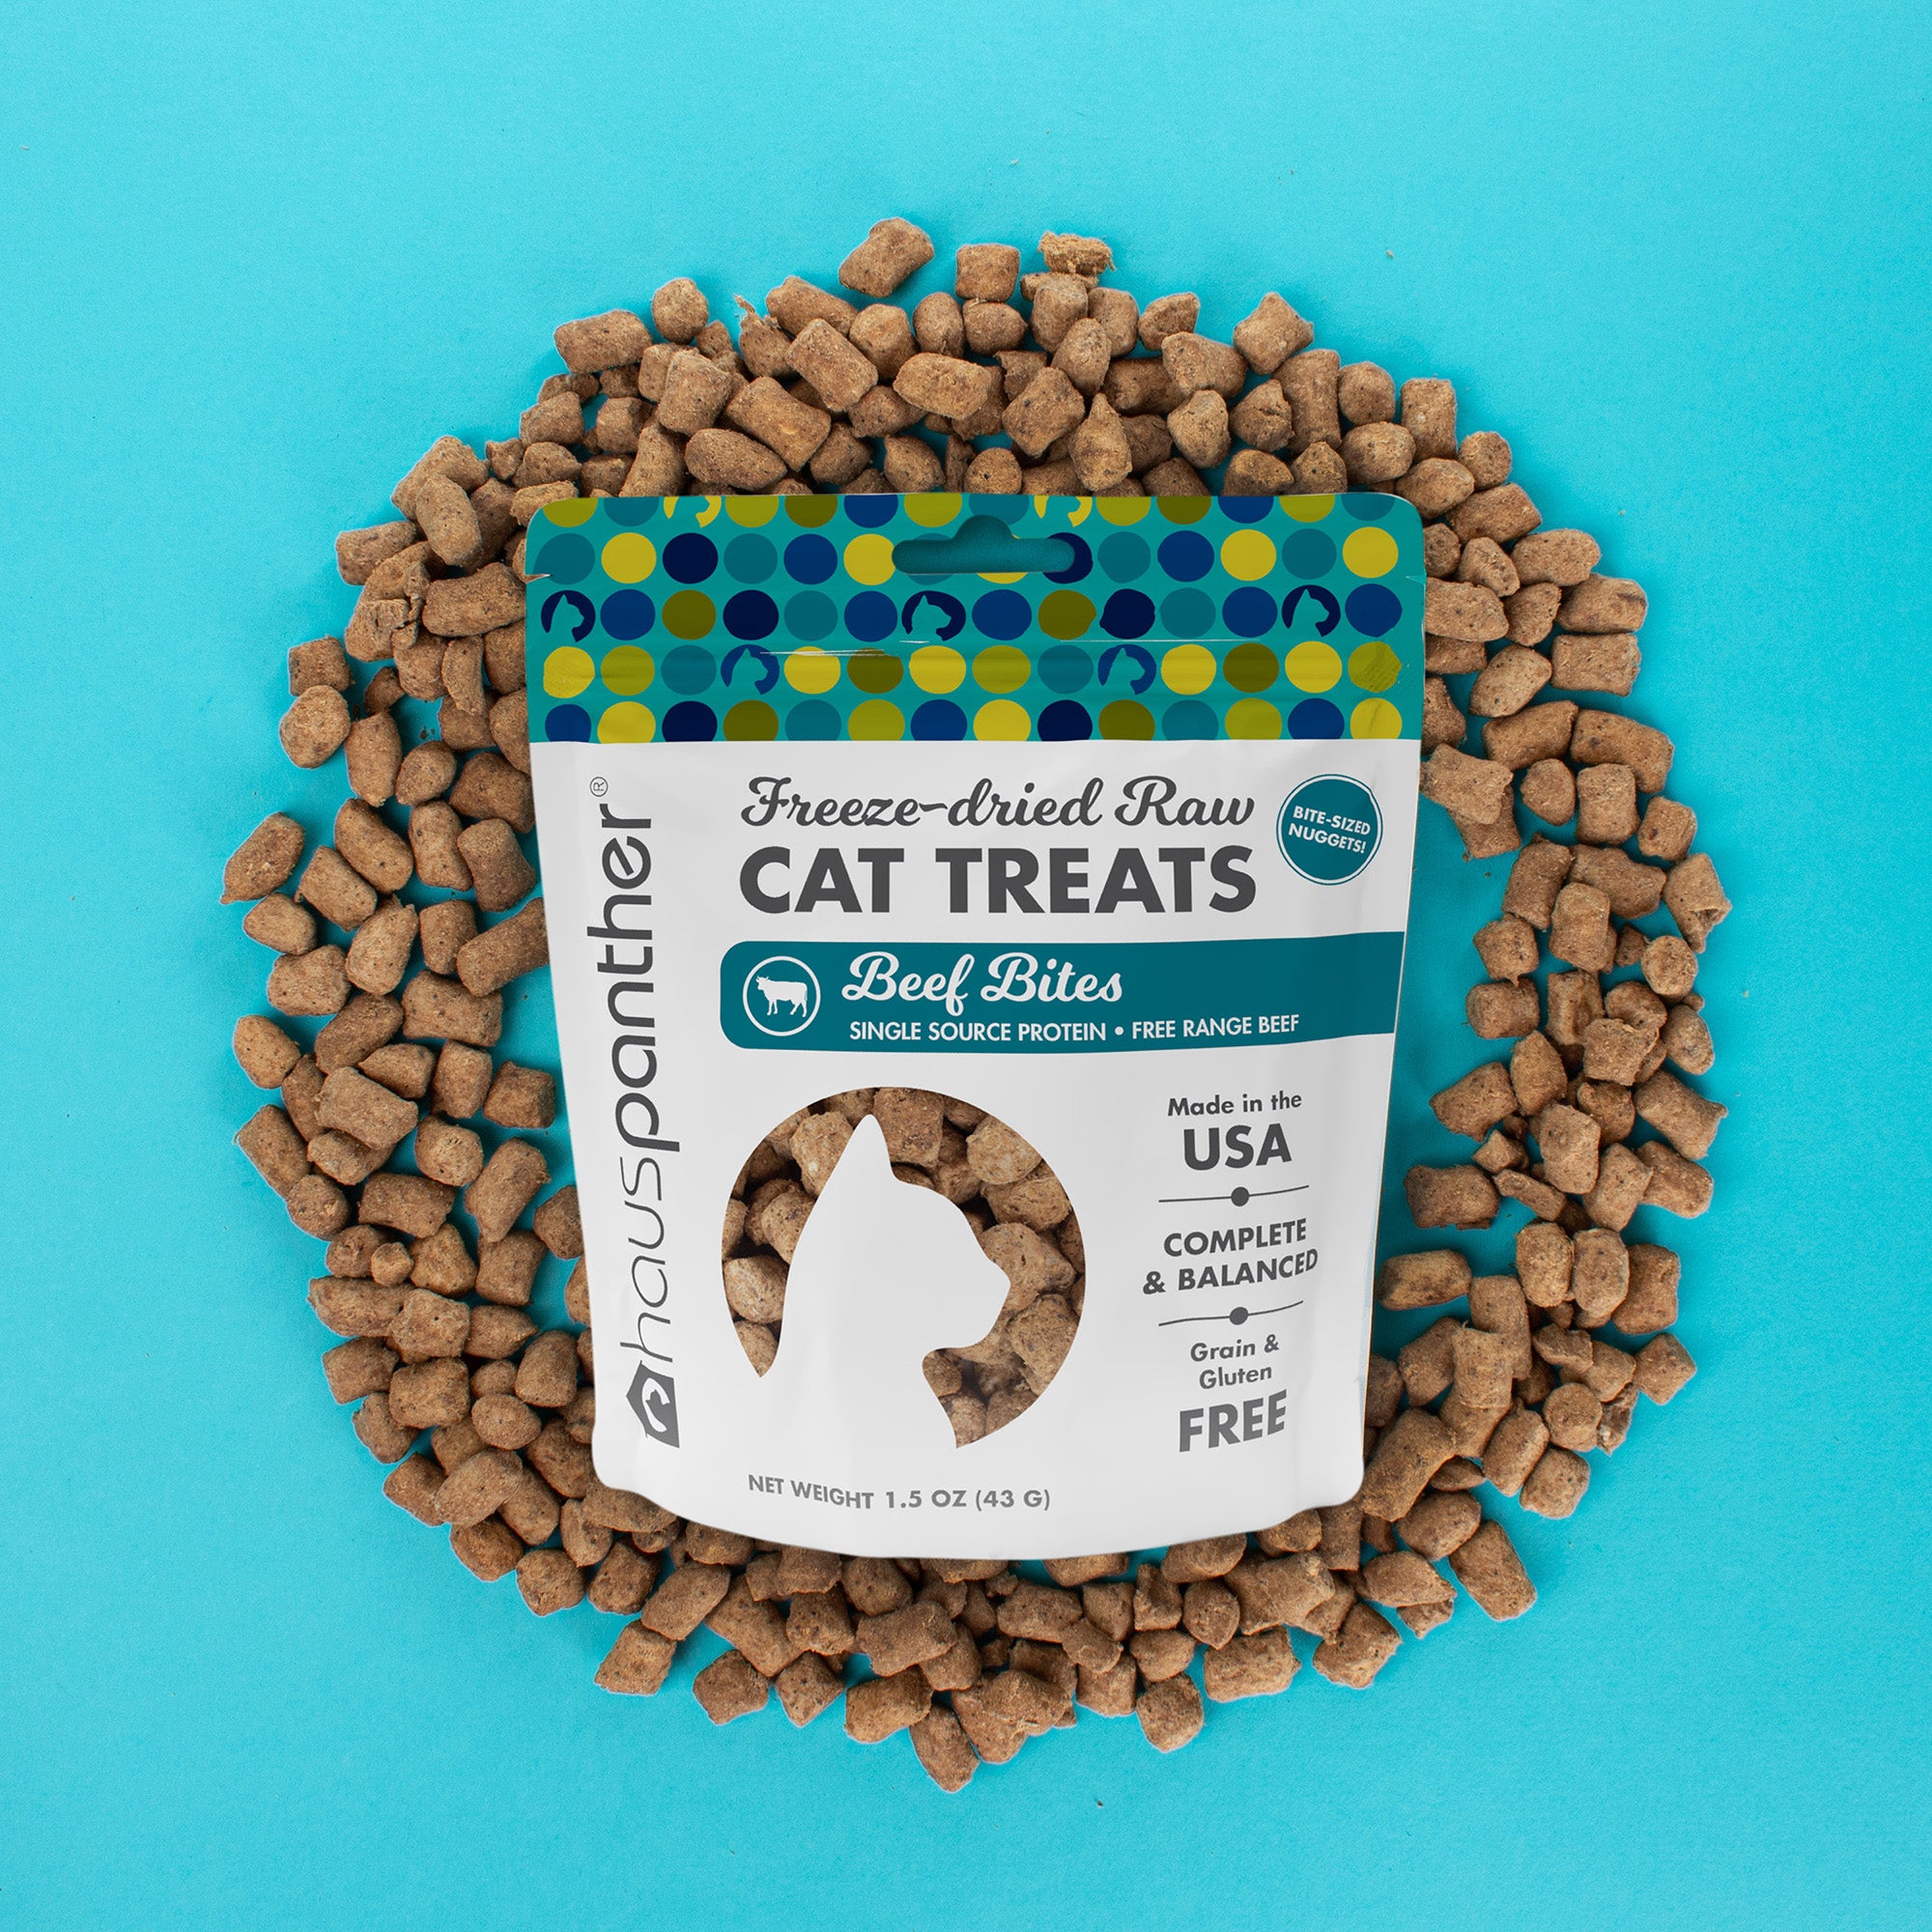 Image of Bites Freeze-dried Raw Cat Treats 1.5 oz by Hauspanther